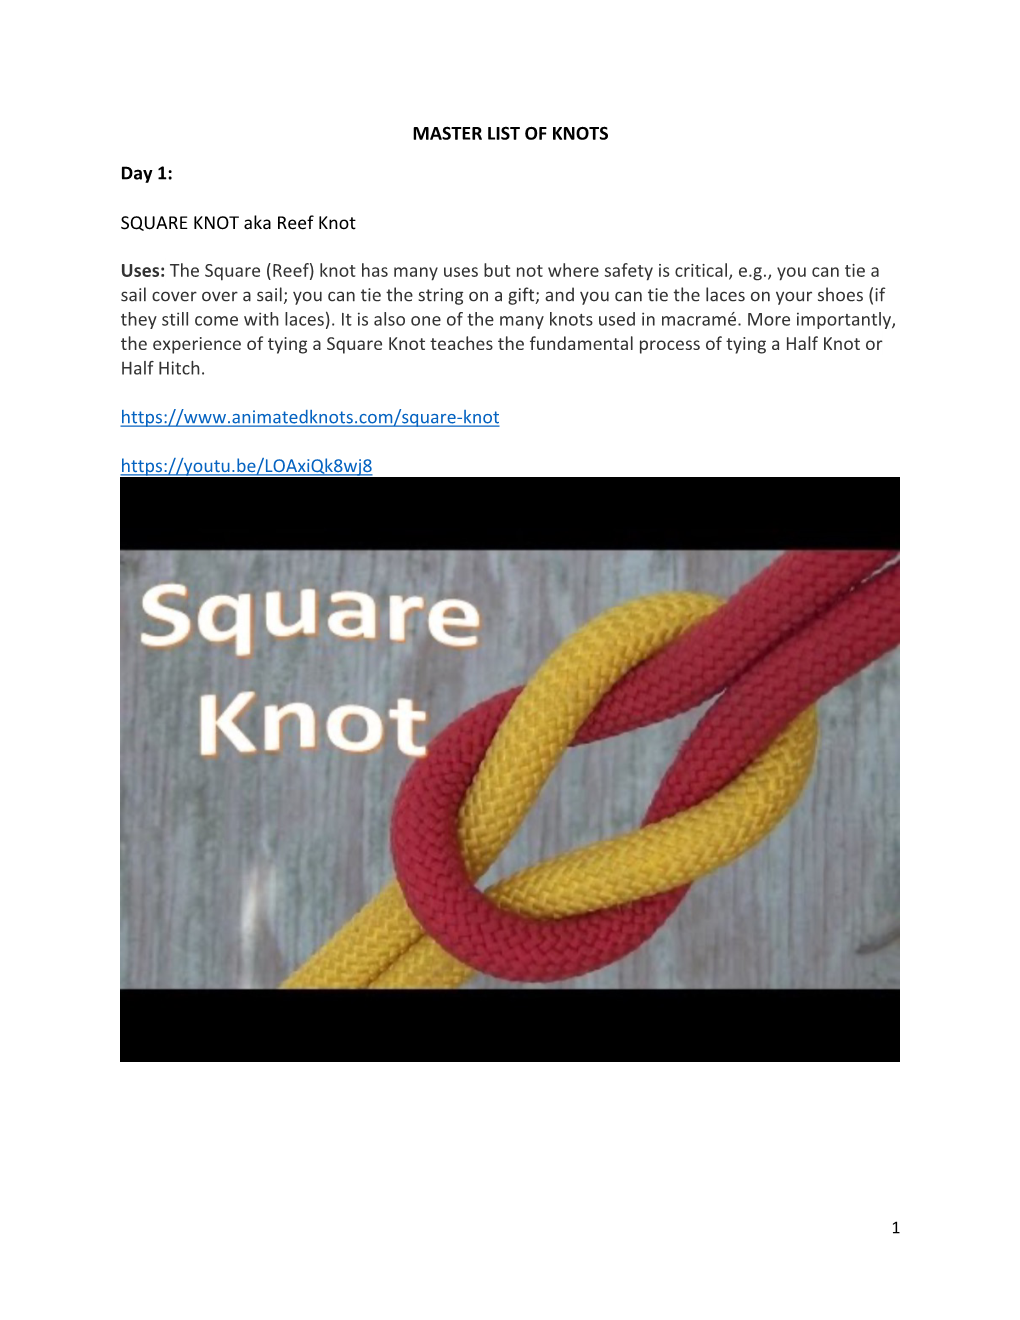 MASTER LIST of KNOTS Day 1: SQUARE KNOT Aka Reef Knot Uses